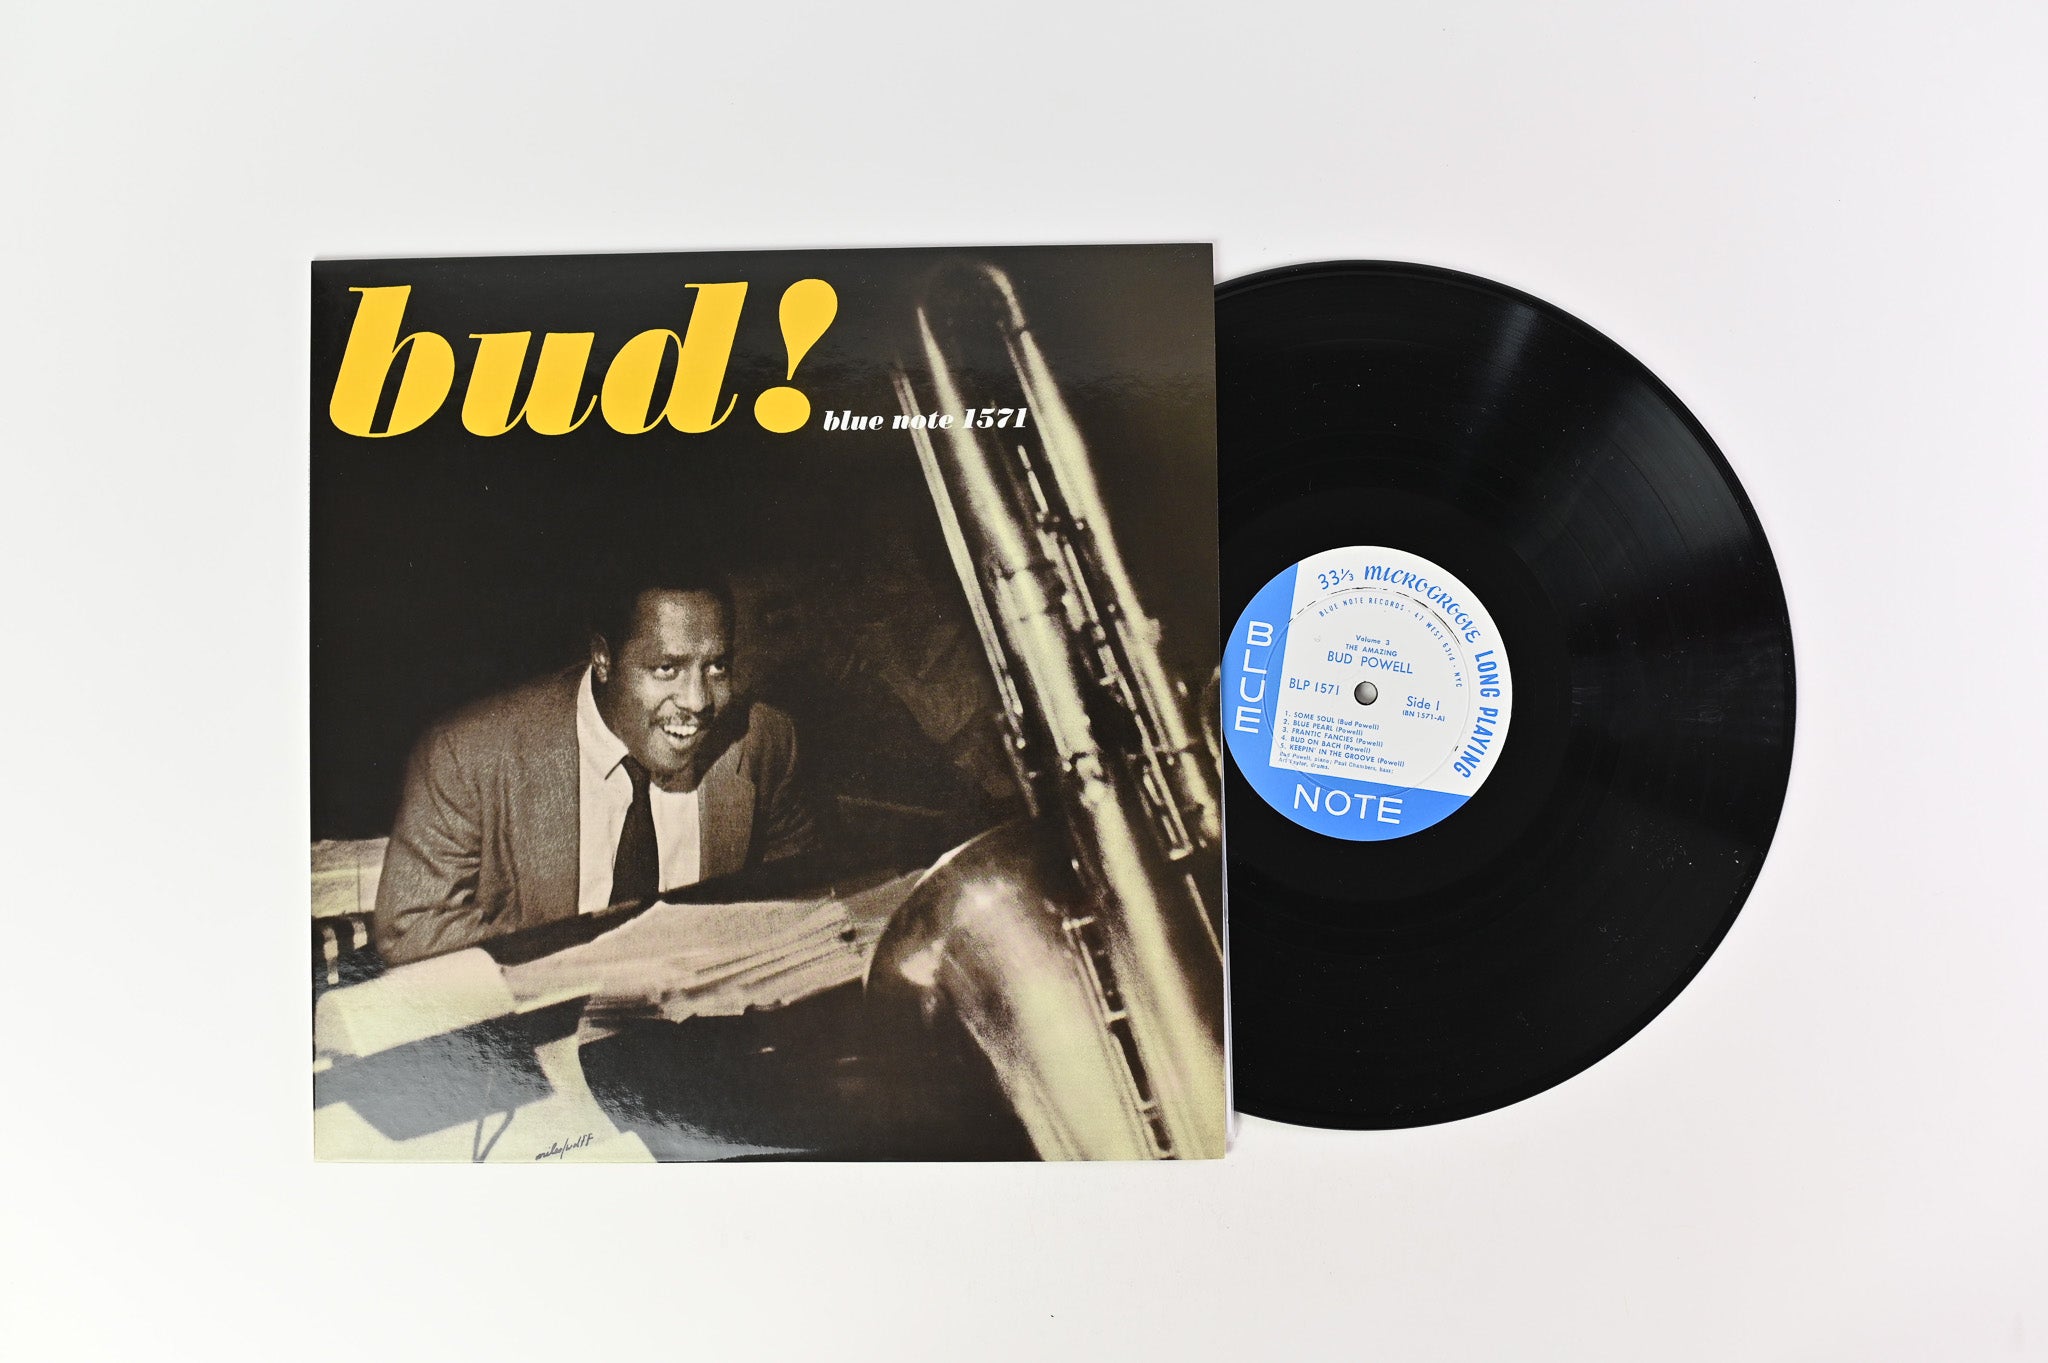 Bud Powell - The Amazing Bud Powell, Vol. 3 - Bud! on Blue Note 200 Gram Classic Records Reissue